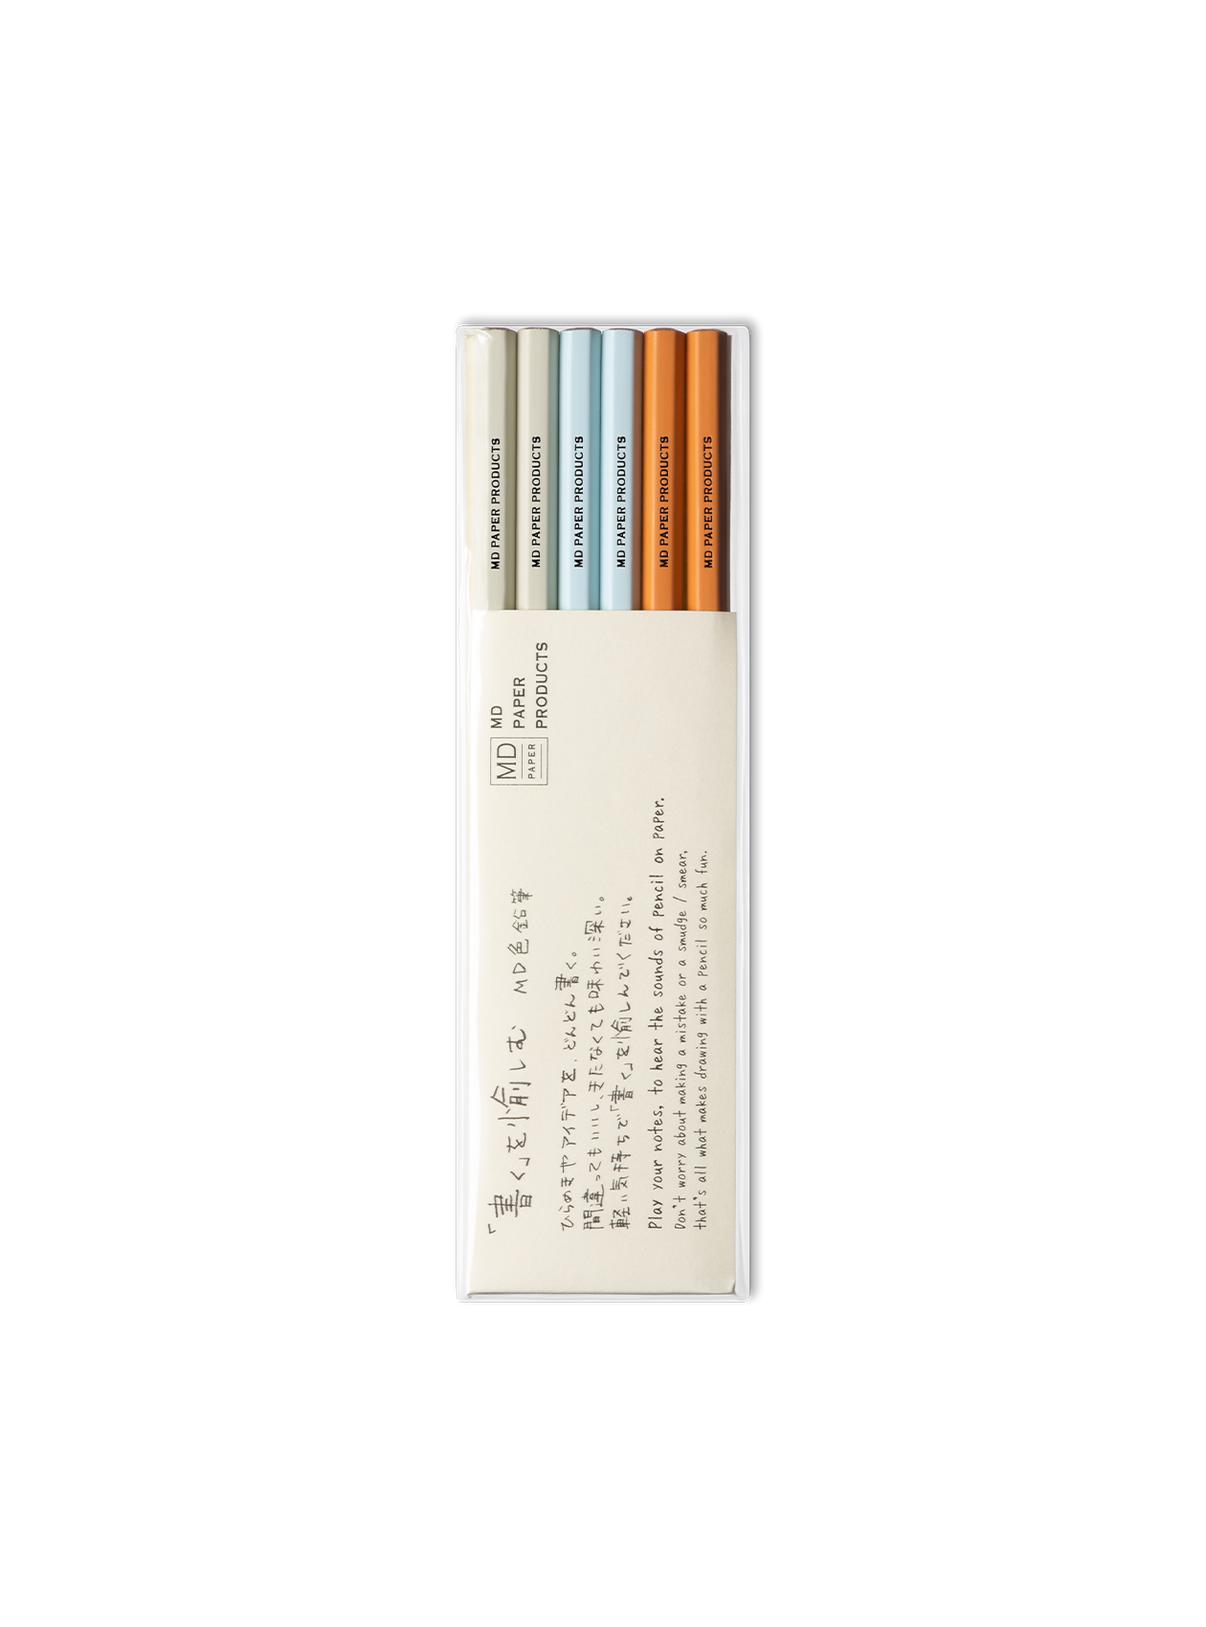  Midori Color Pencil Set of 6 colored pencils in 3 colors - classic graphite gray, light blue, and orange inside packaging